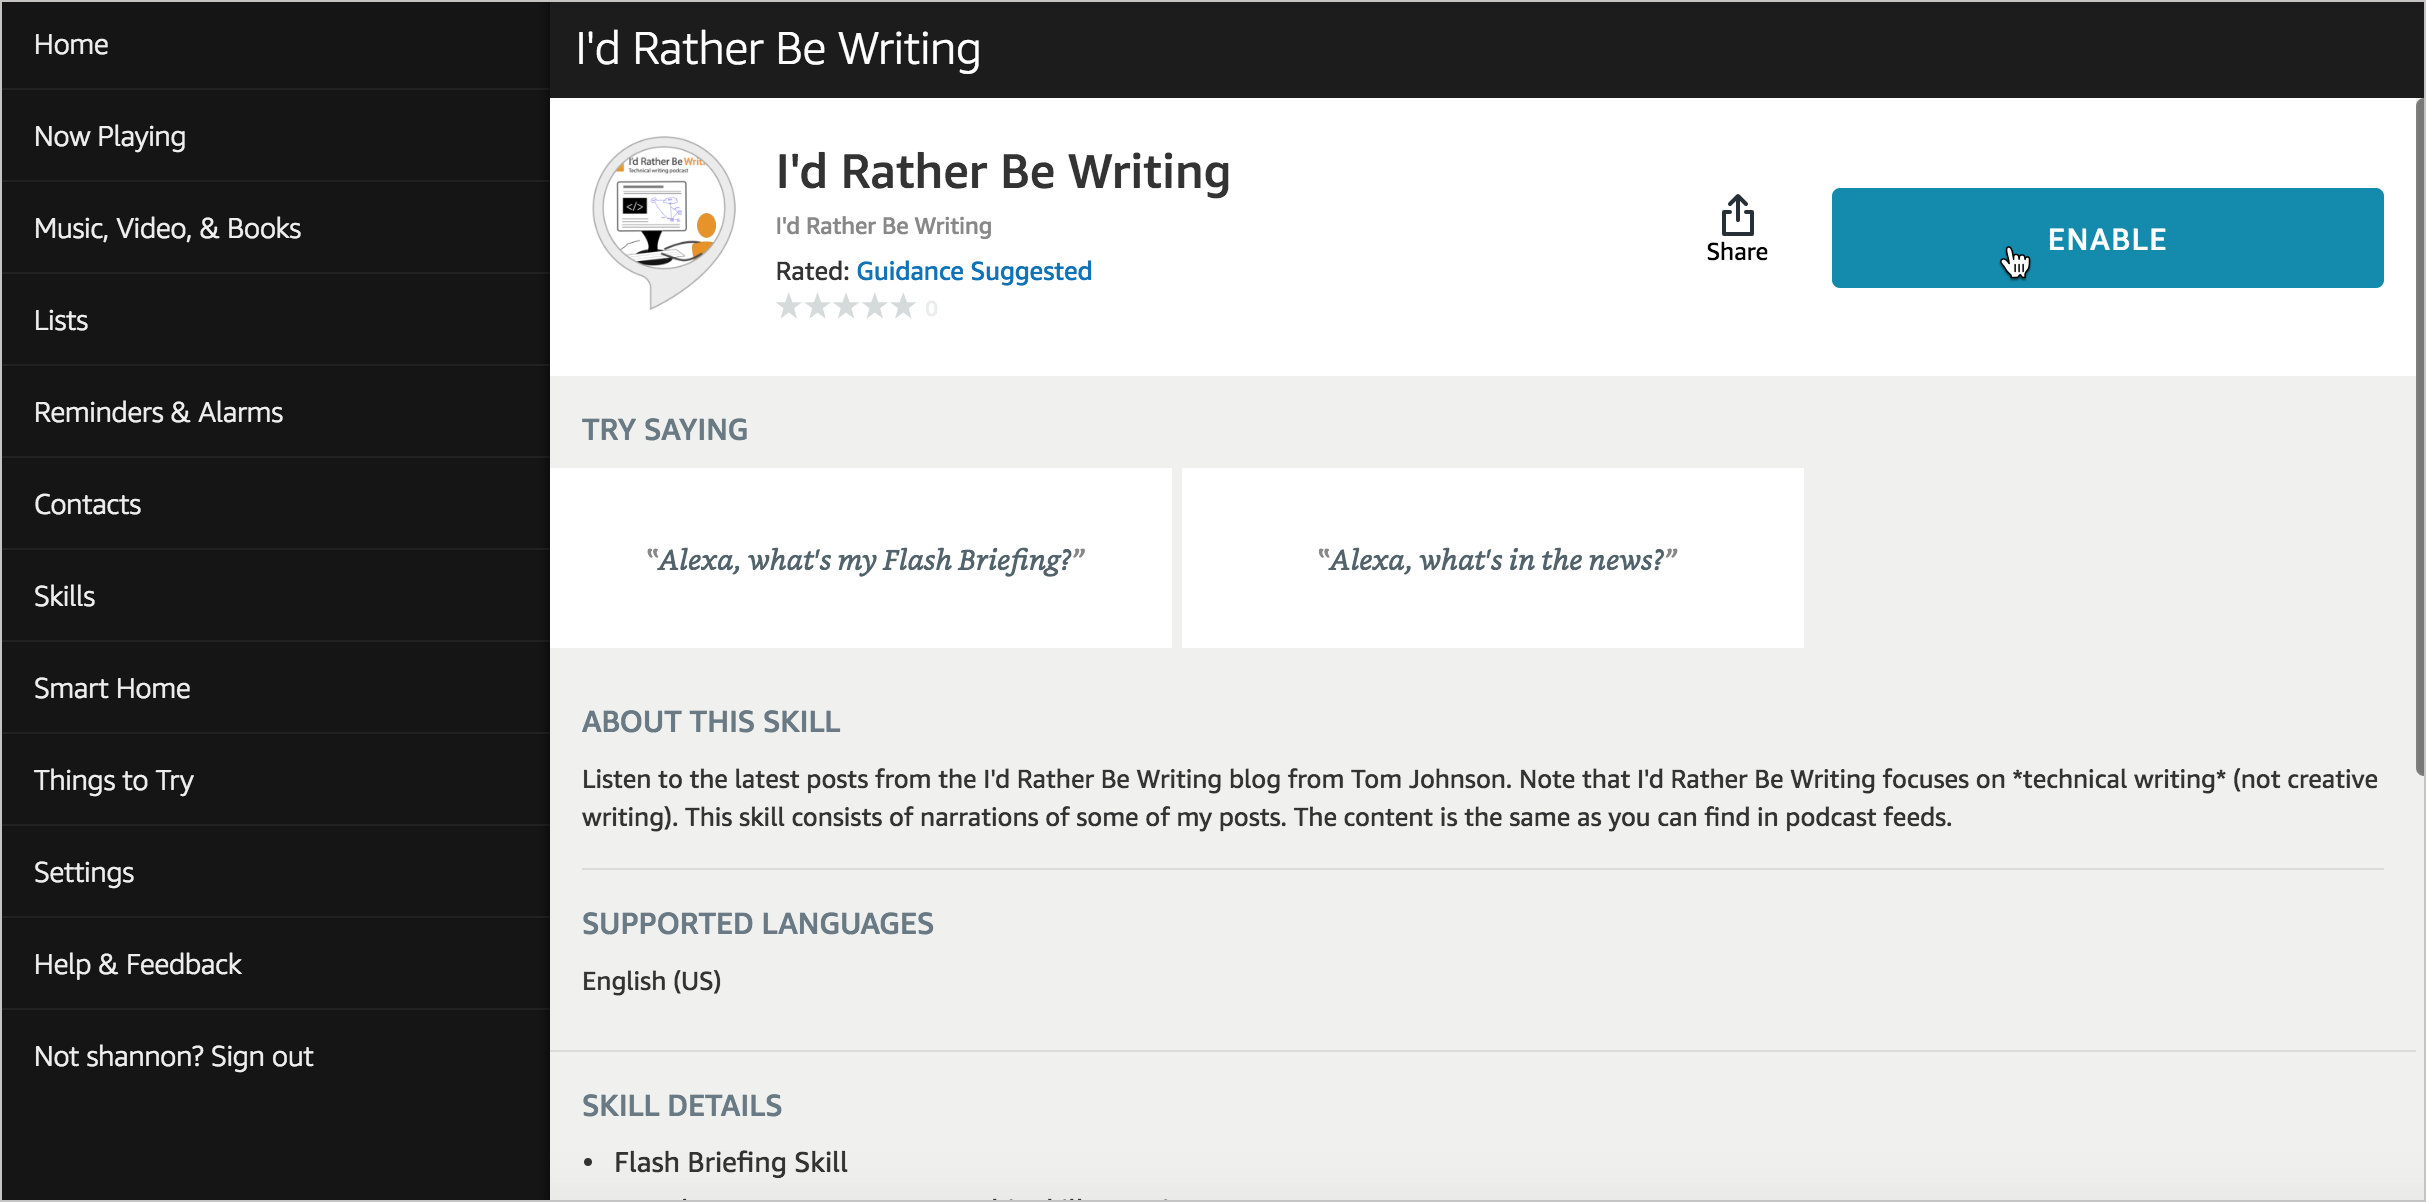 I'd Rather Be Writing is now an Alexa Flash Briefing skill